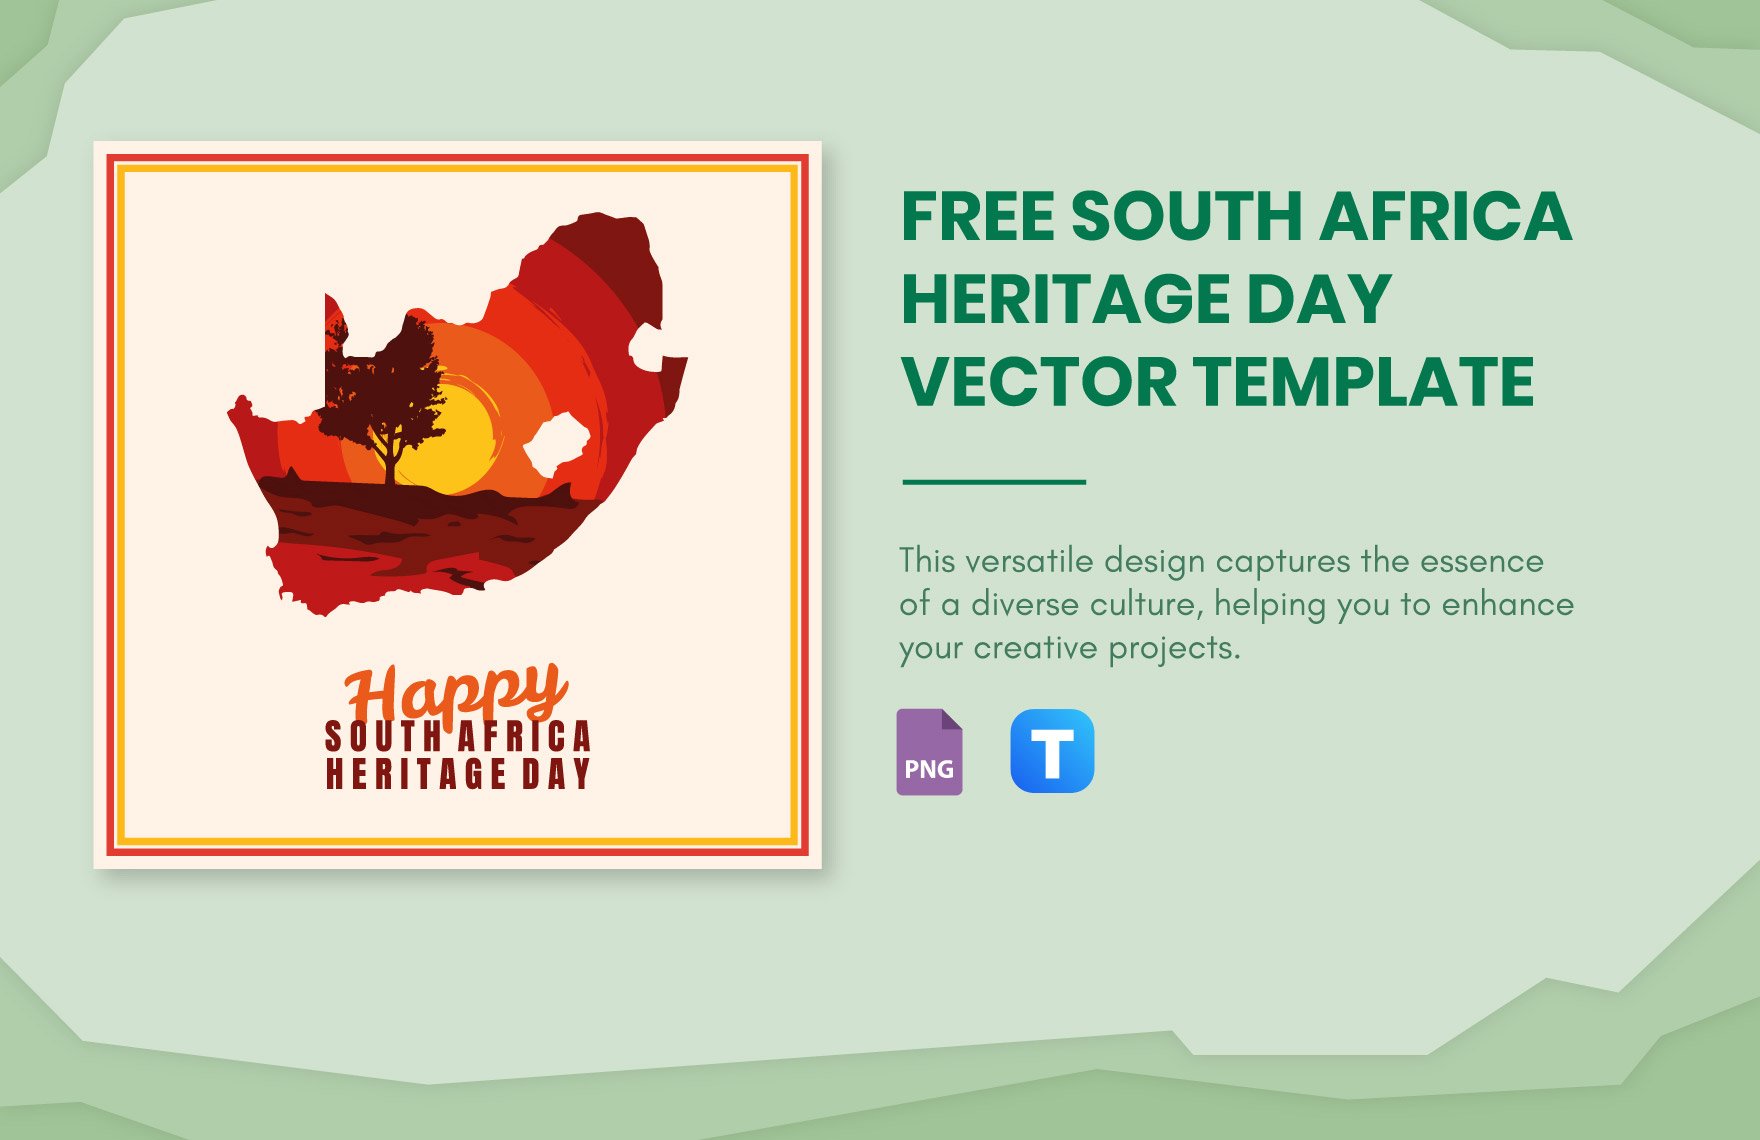 South Africa Heritage Day Vector